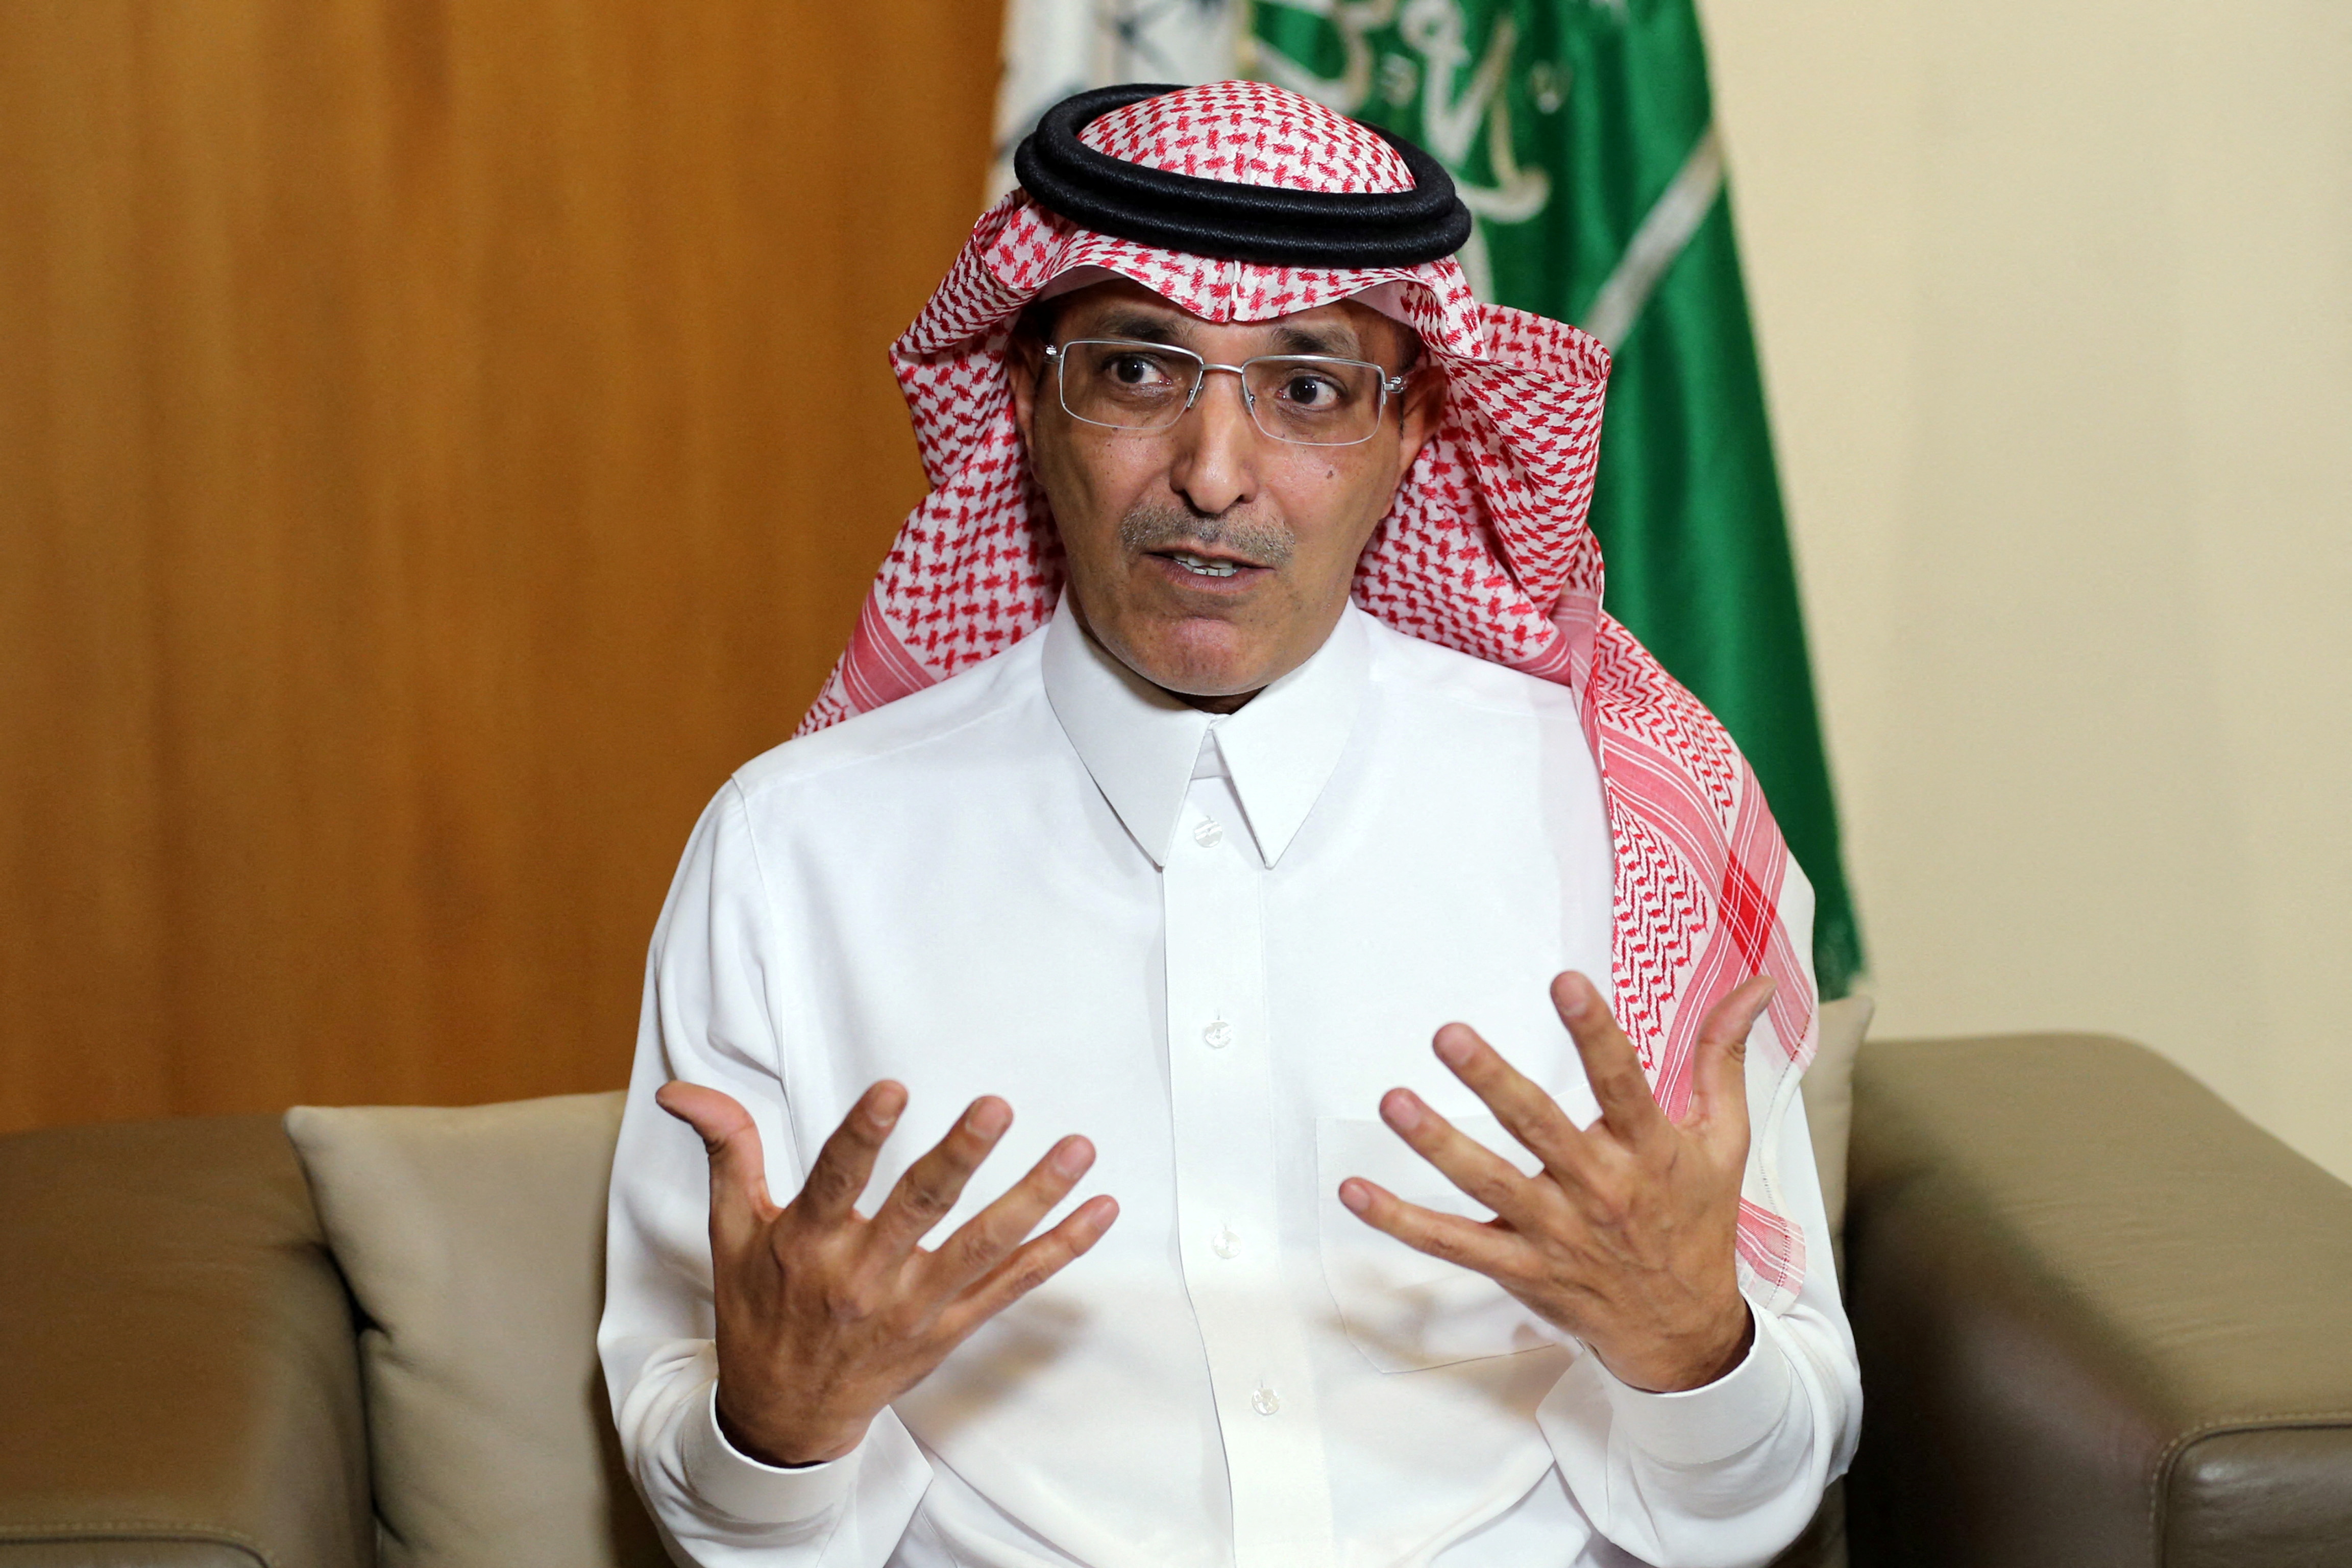 Saudi Minister of Finance Mohammed al-Jadaan gestures during an interview with Reuters at the Ministry of Finance in Riyadh